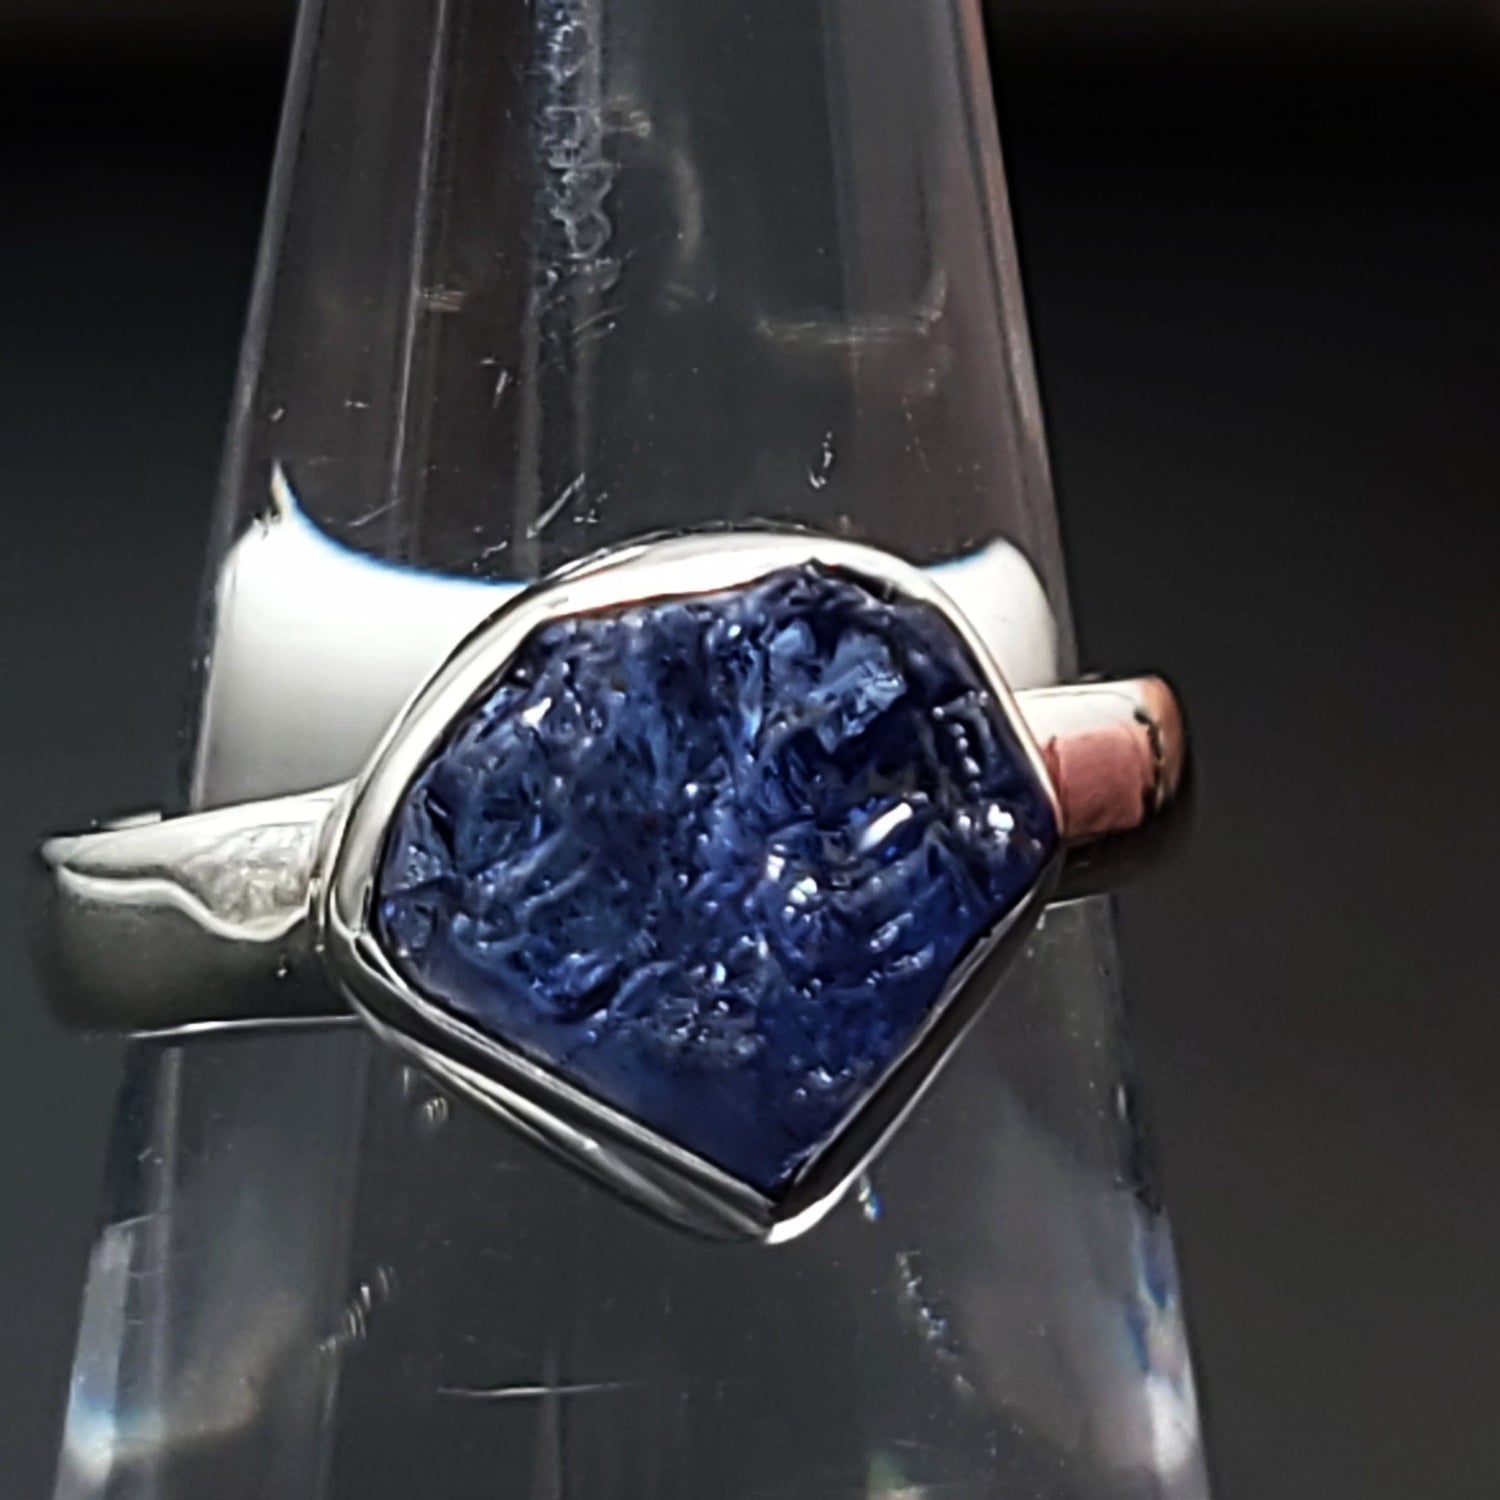 Tanzanite Ring Sterling Silver Rough Stone - Elevated Metaphysical